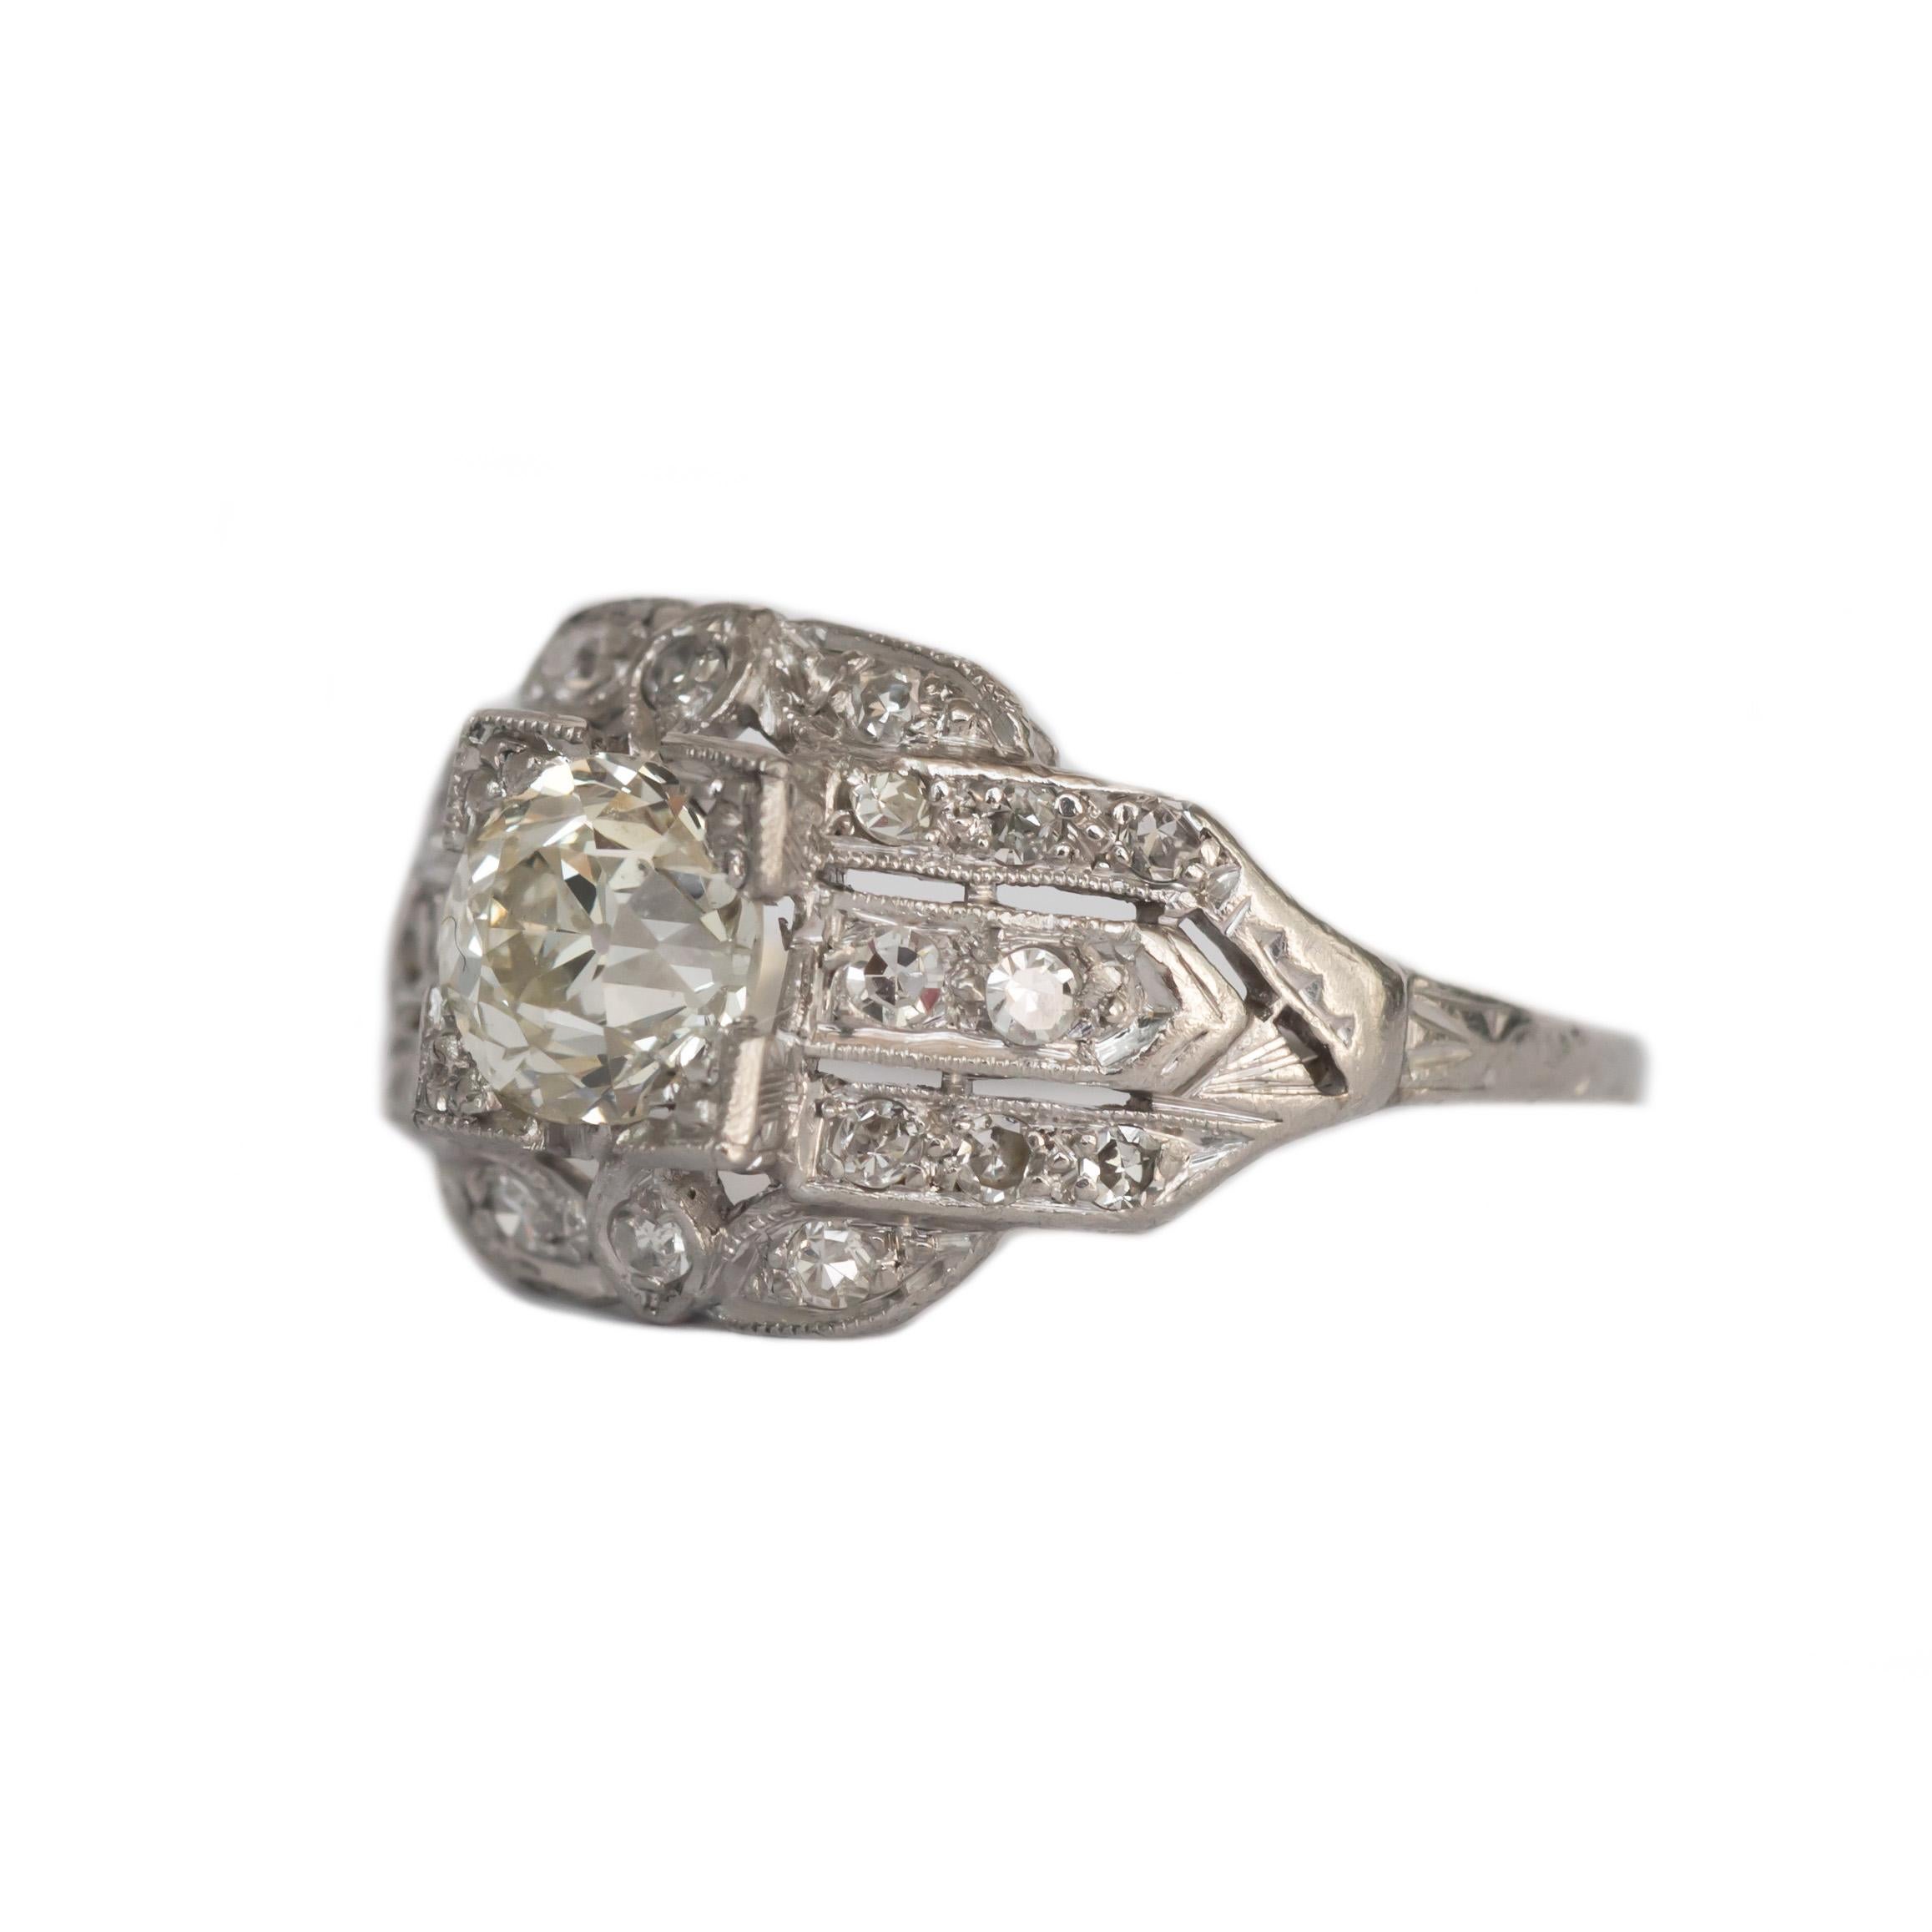 Ring Size: 4.5
Metal Type: Platinum
Weight: 3.7 grams

Center Diamond Details
GIA CERTIFIED Center Diamond - Certificate # 6194918635
Shape: Old European Brilliant 
Carat Weight: .77 carat
Color: L
Clarity: SI2

Side Stone Details: 
Shape: Antique